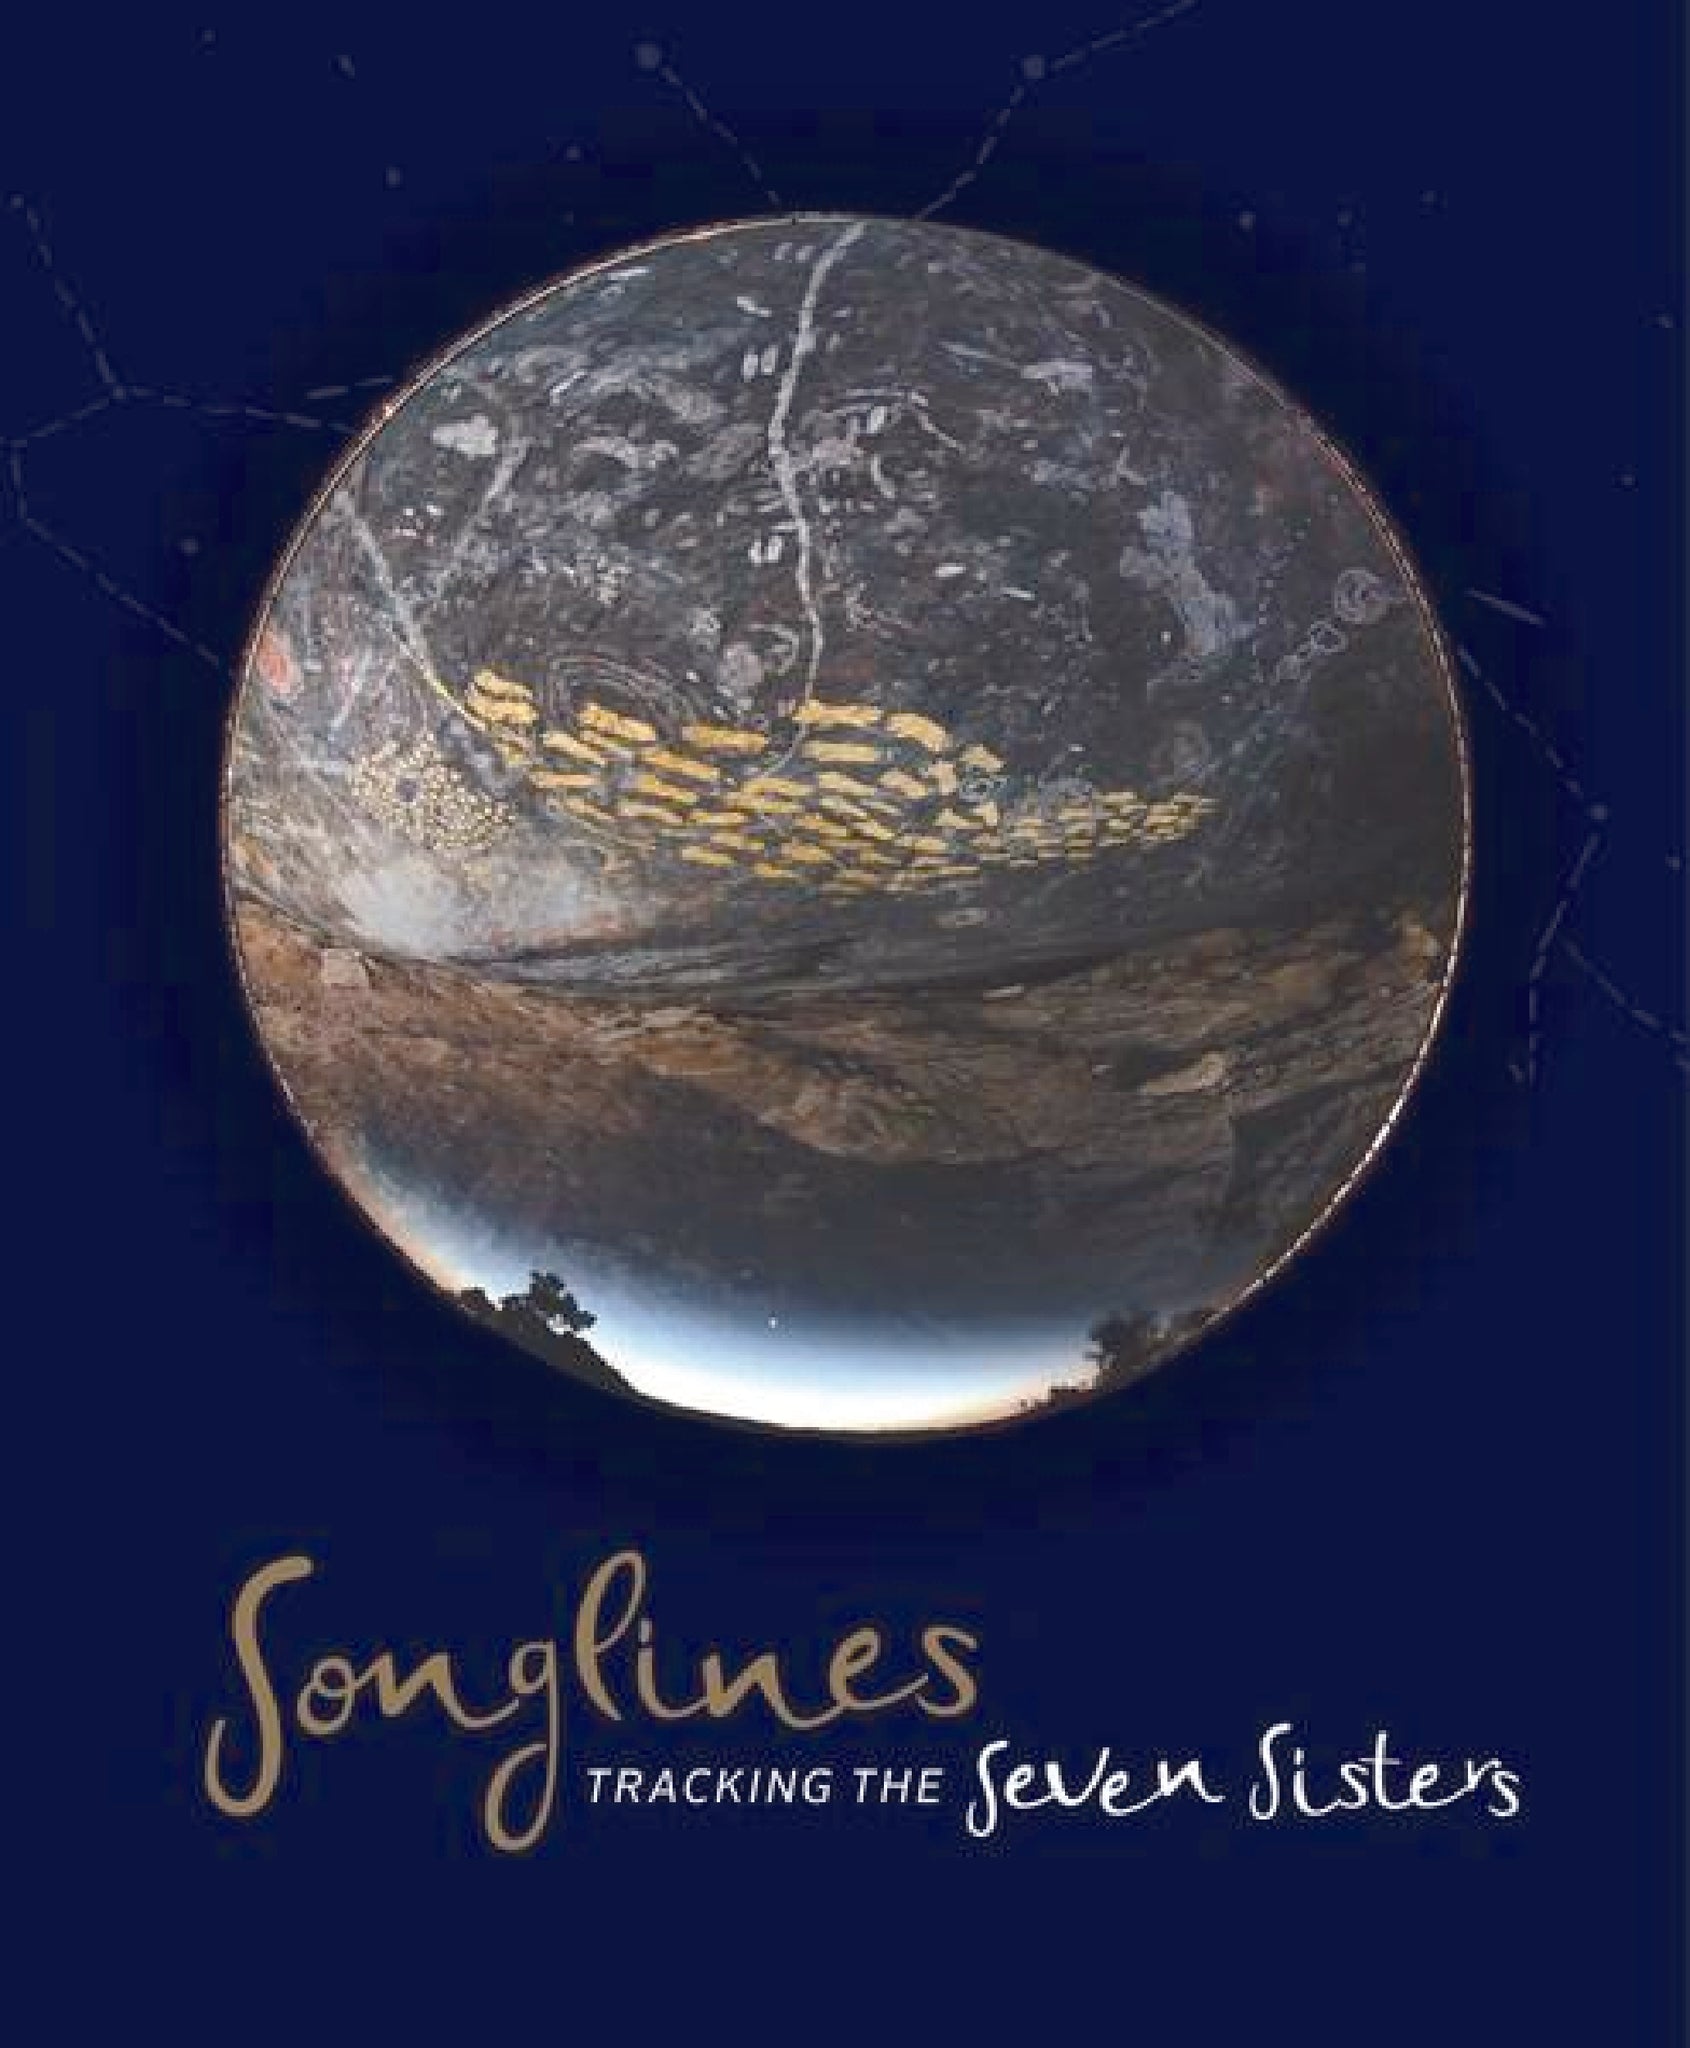 SONGLINES: Tracking the Seven Sisters